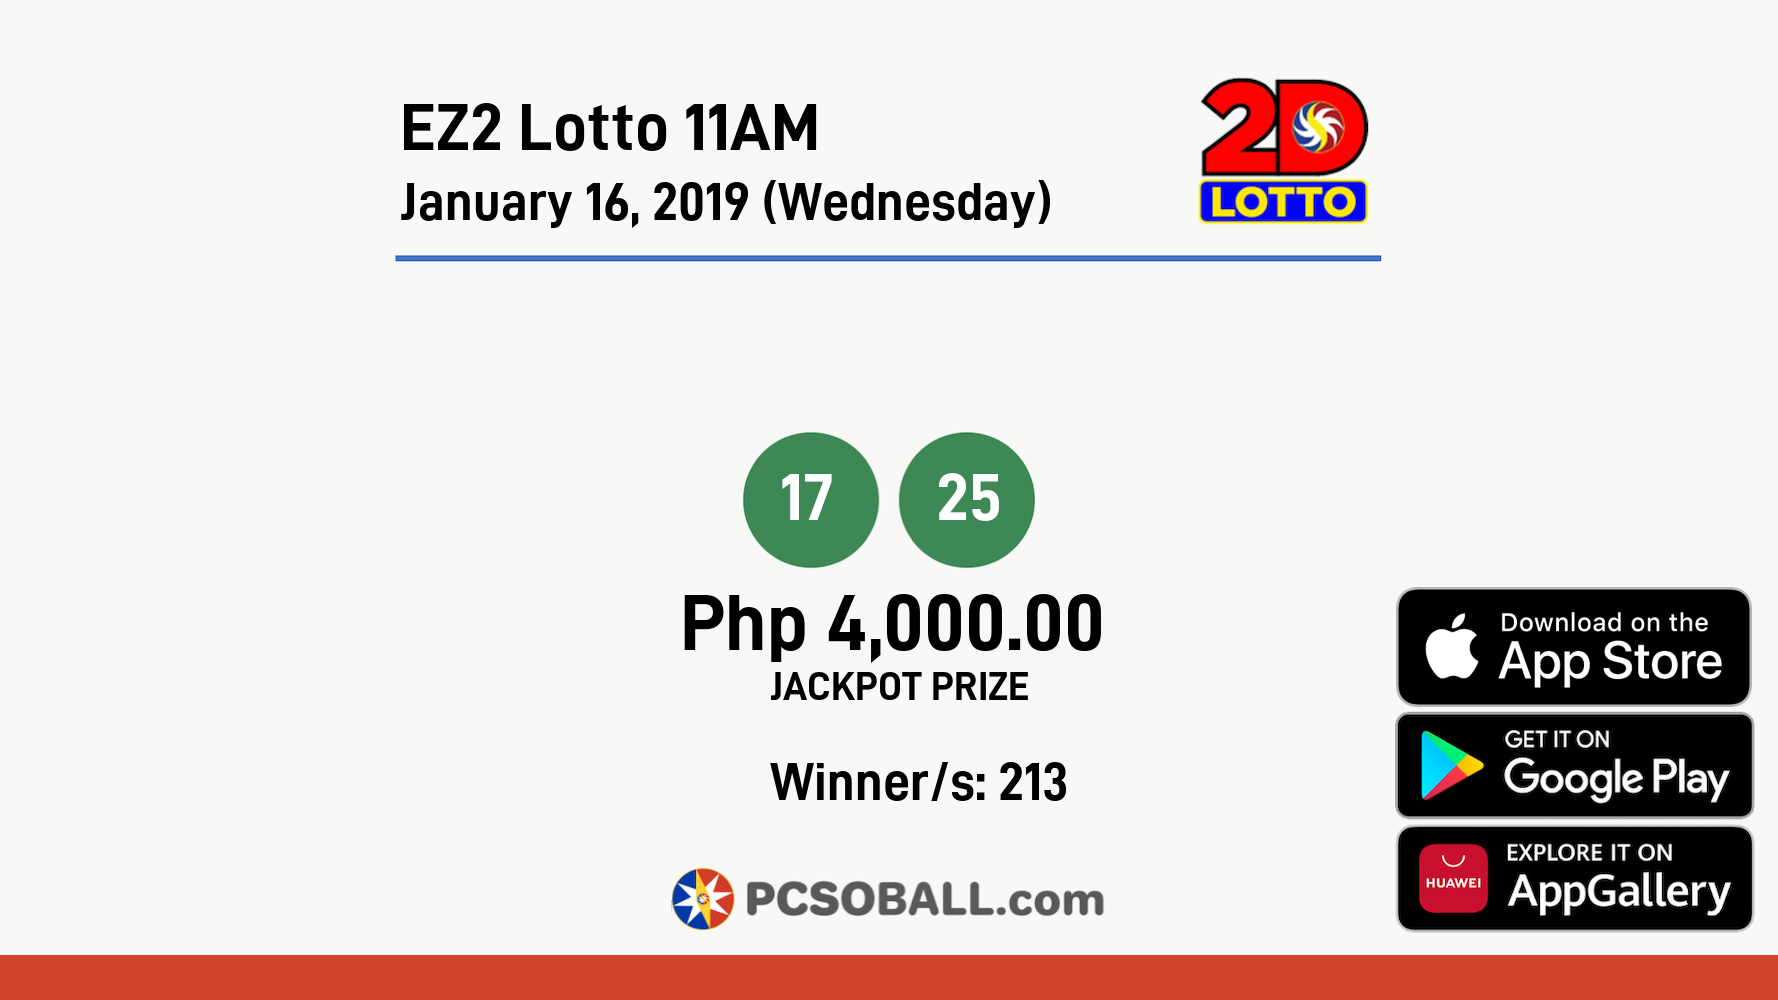 EZ2 Lotto 11AM January 16, 2019 (Wednesday) Result